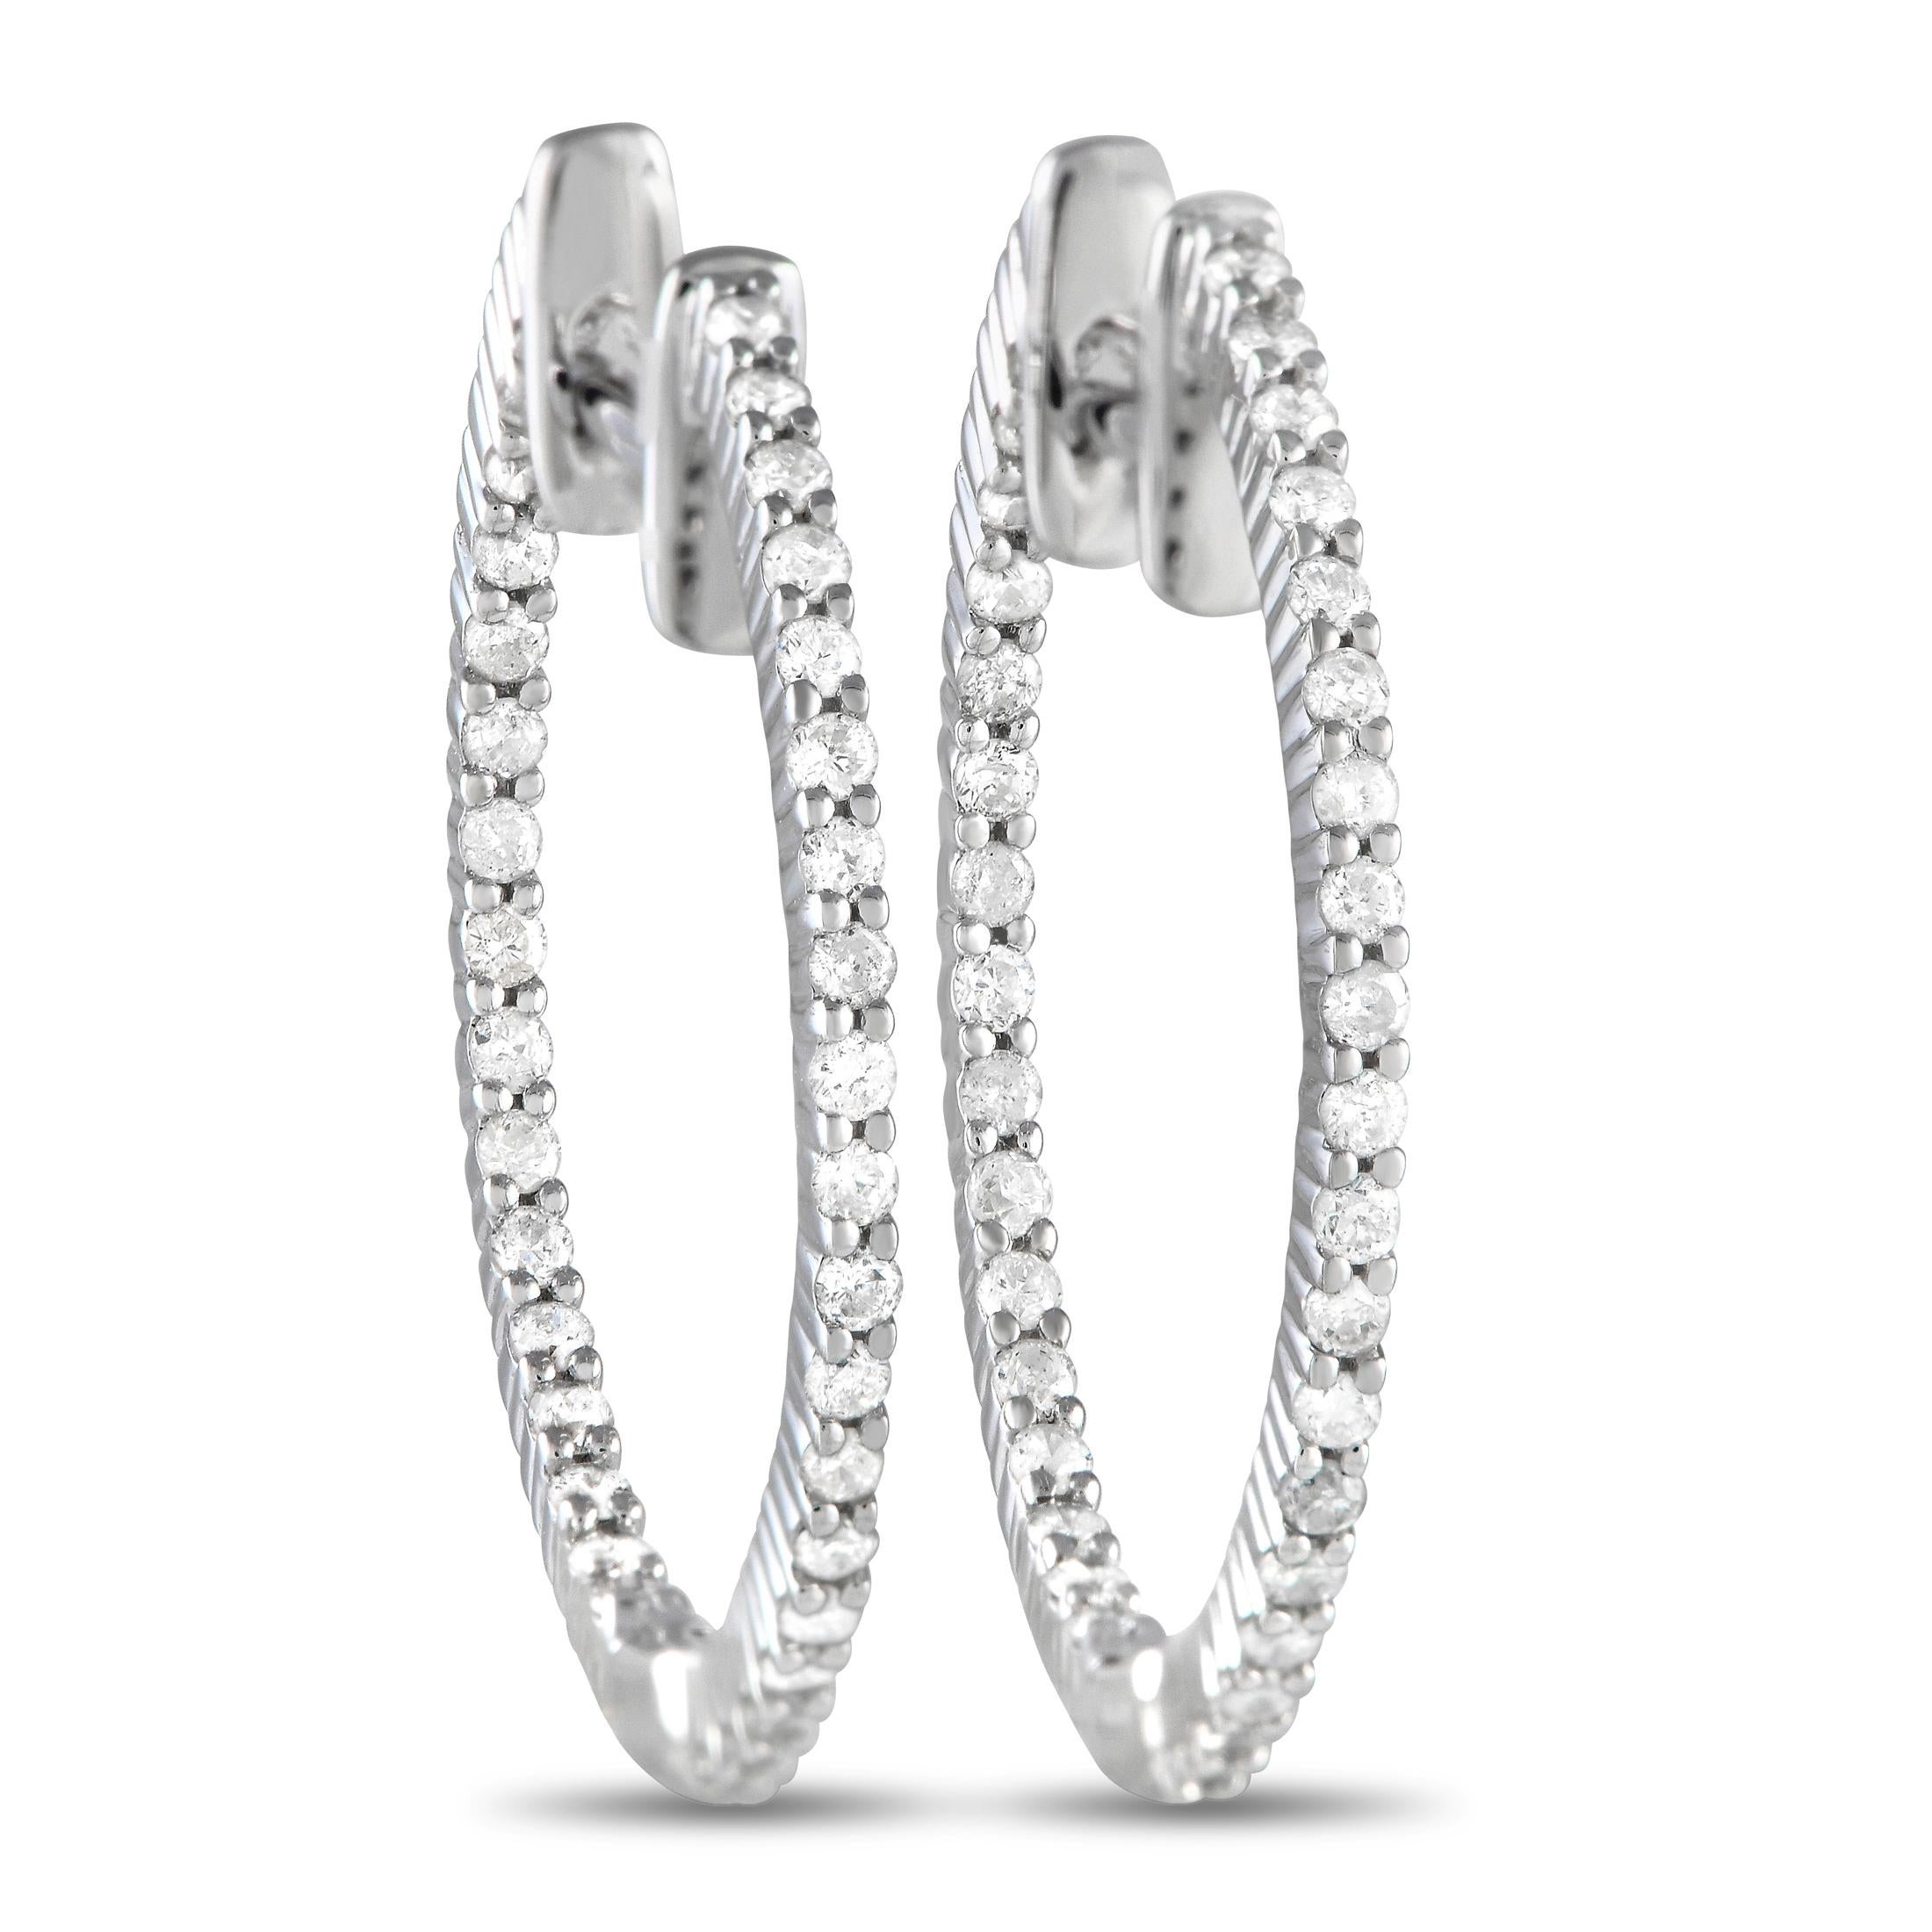 Lb Exclusive 14k White Gold 0.55 Carat Diamond Inside-Out Hoop Earrings In New Condition For Sale In Southampton, PA